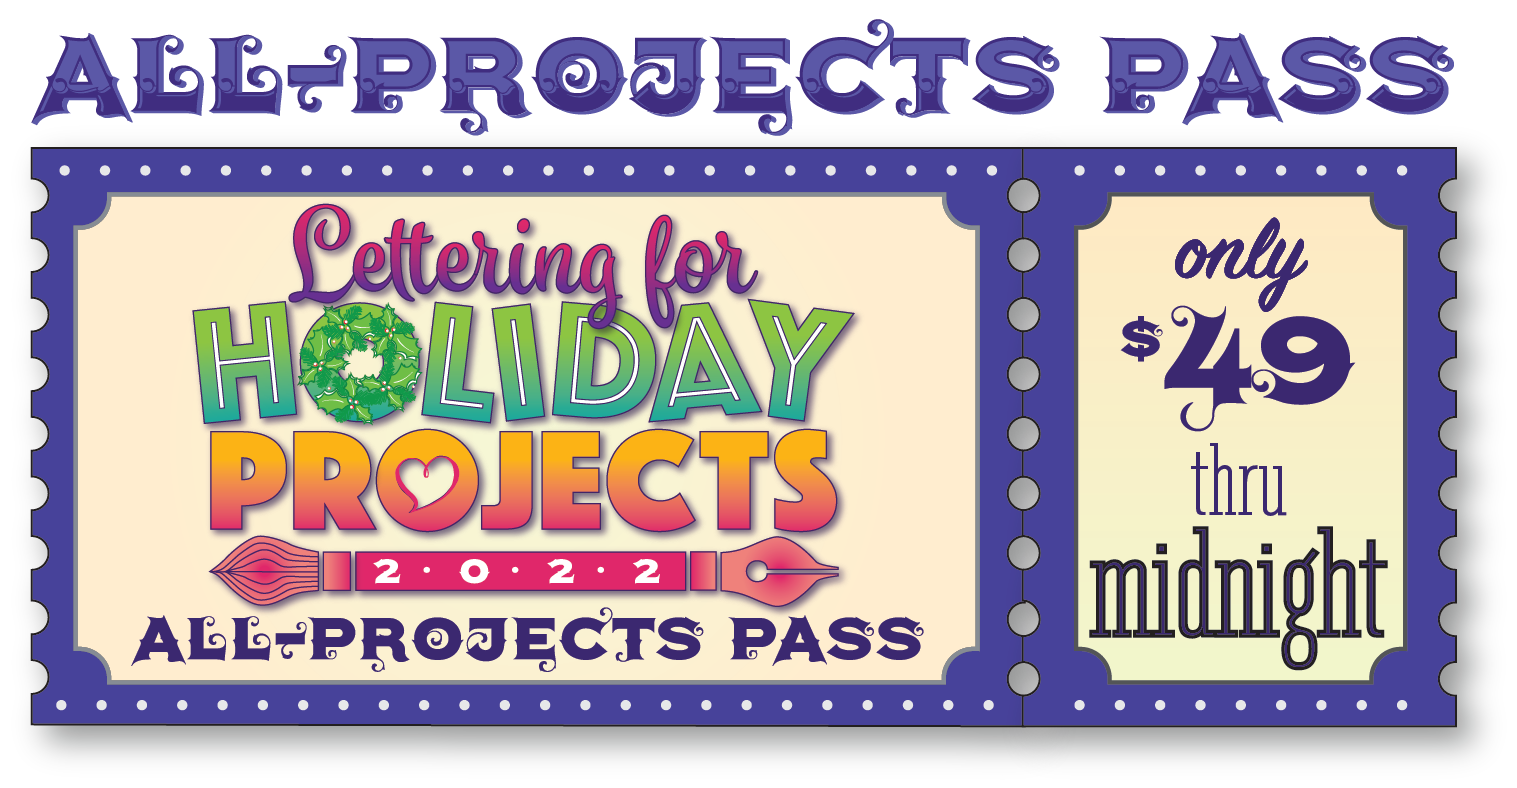 All Projects Pass expires Midnight Oct 28